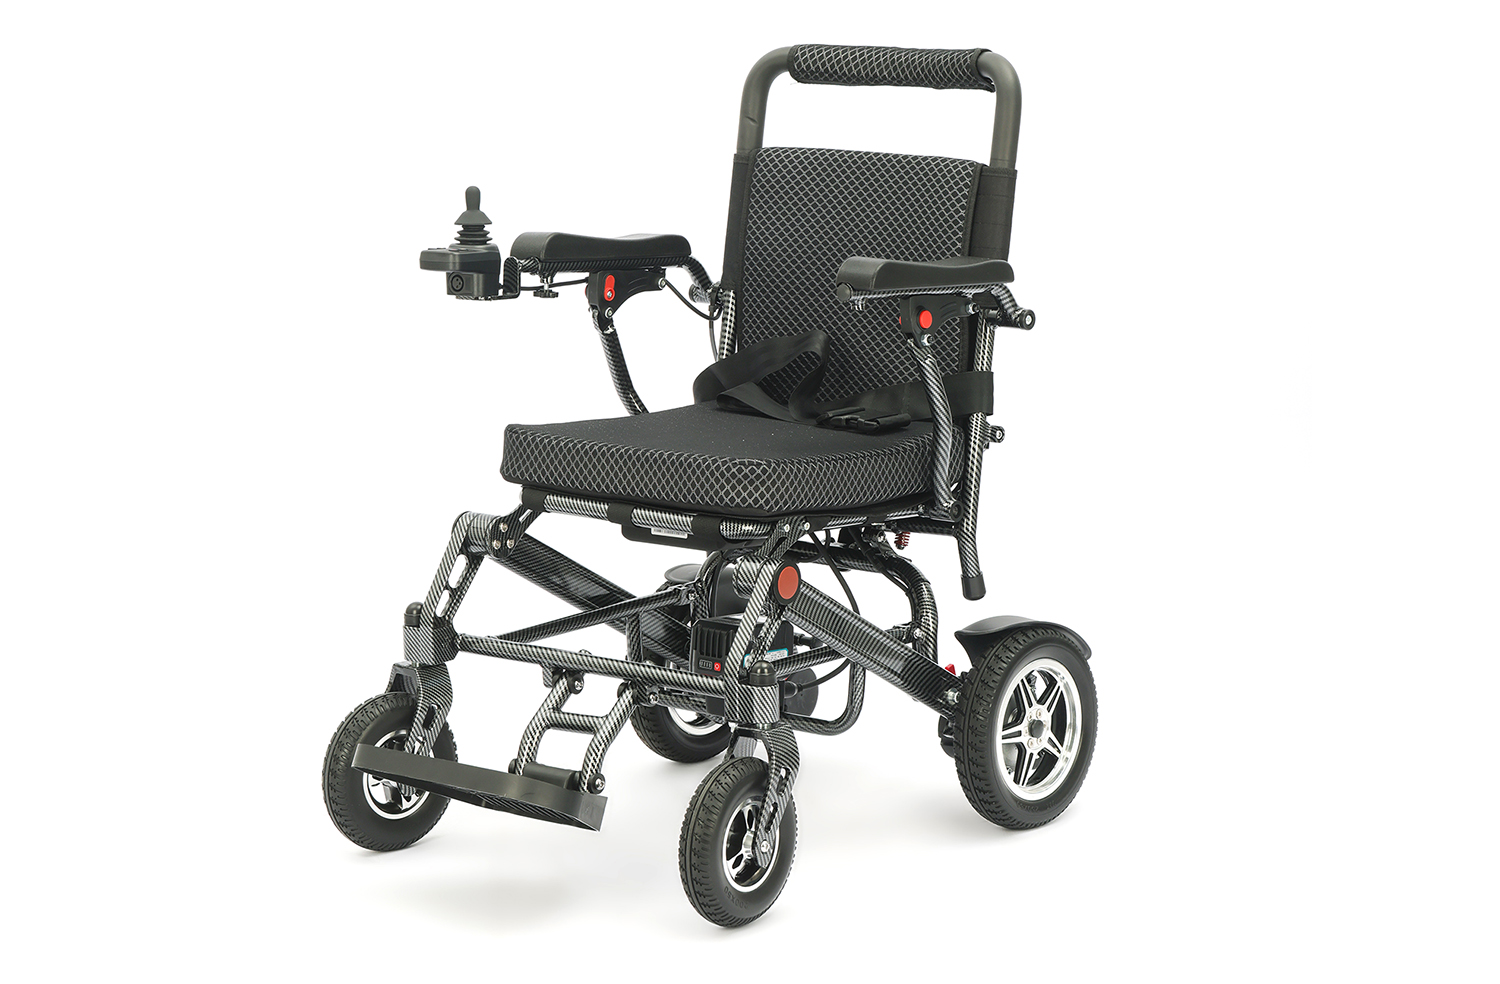 Future development trend of lightweight folding electric wheelchair–Choosing the Perfect Electric Wheelchair for Your Mobility Needs